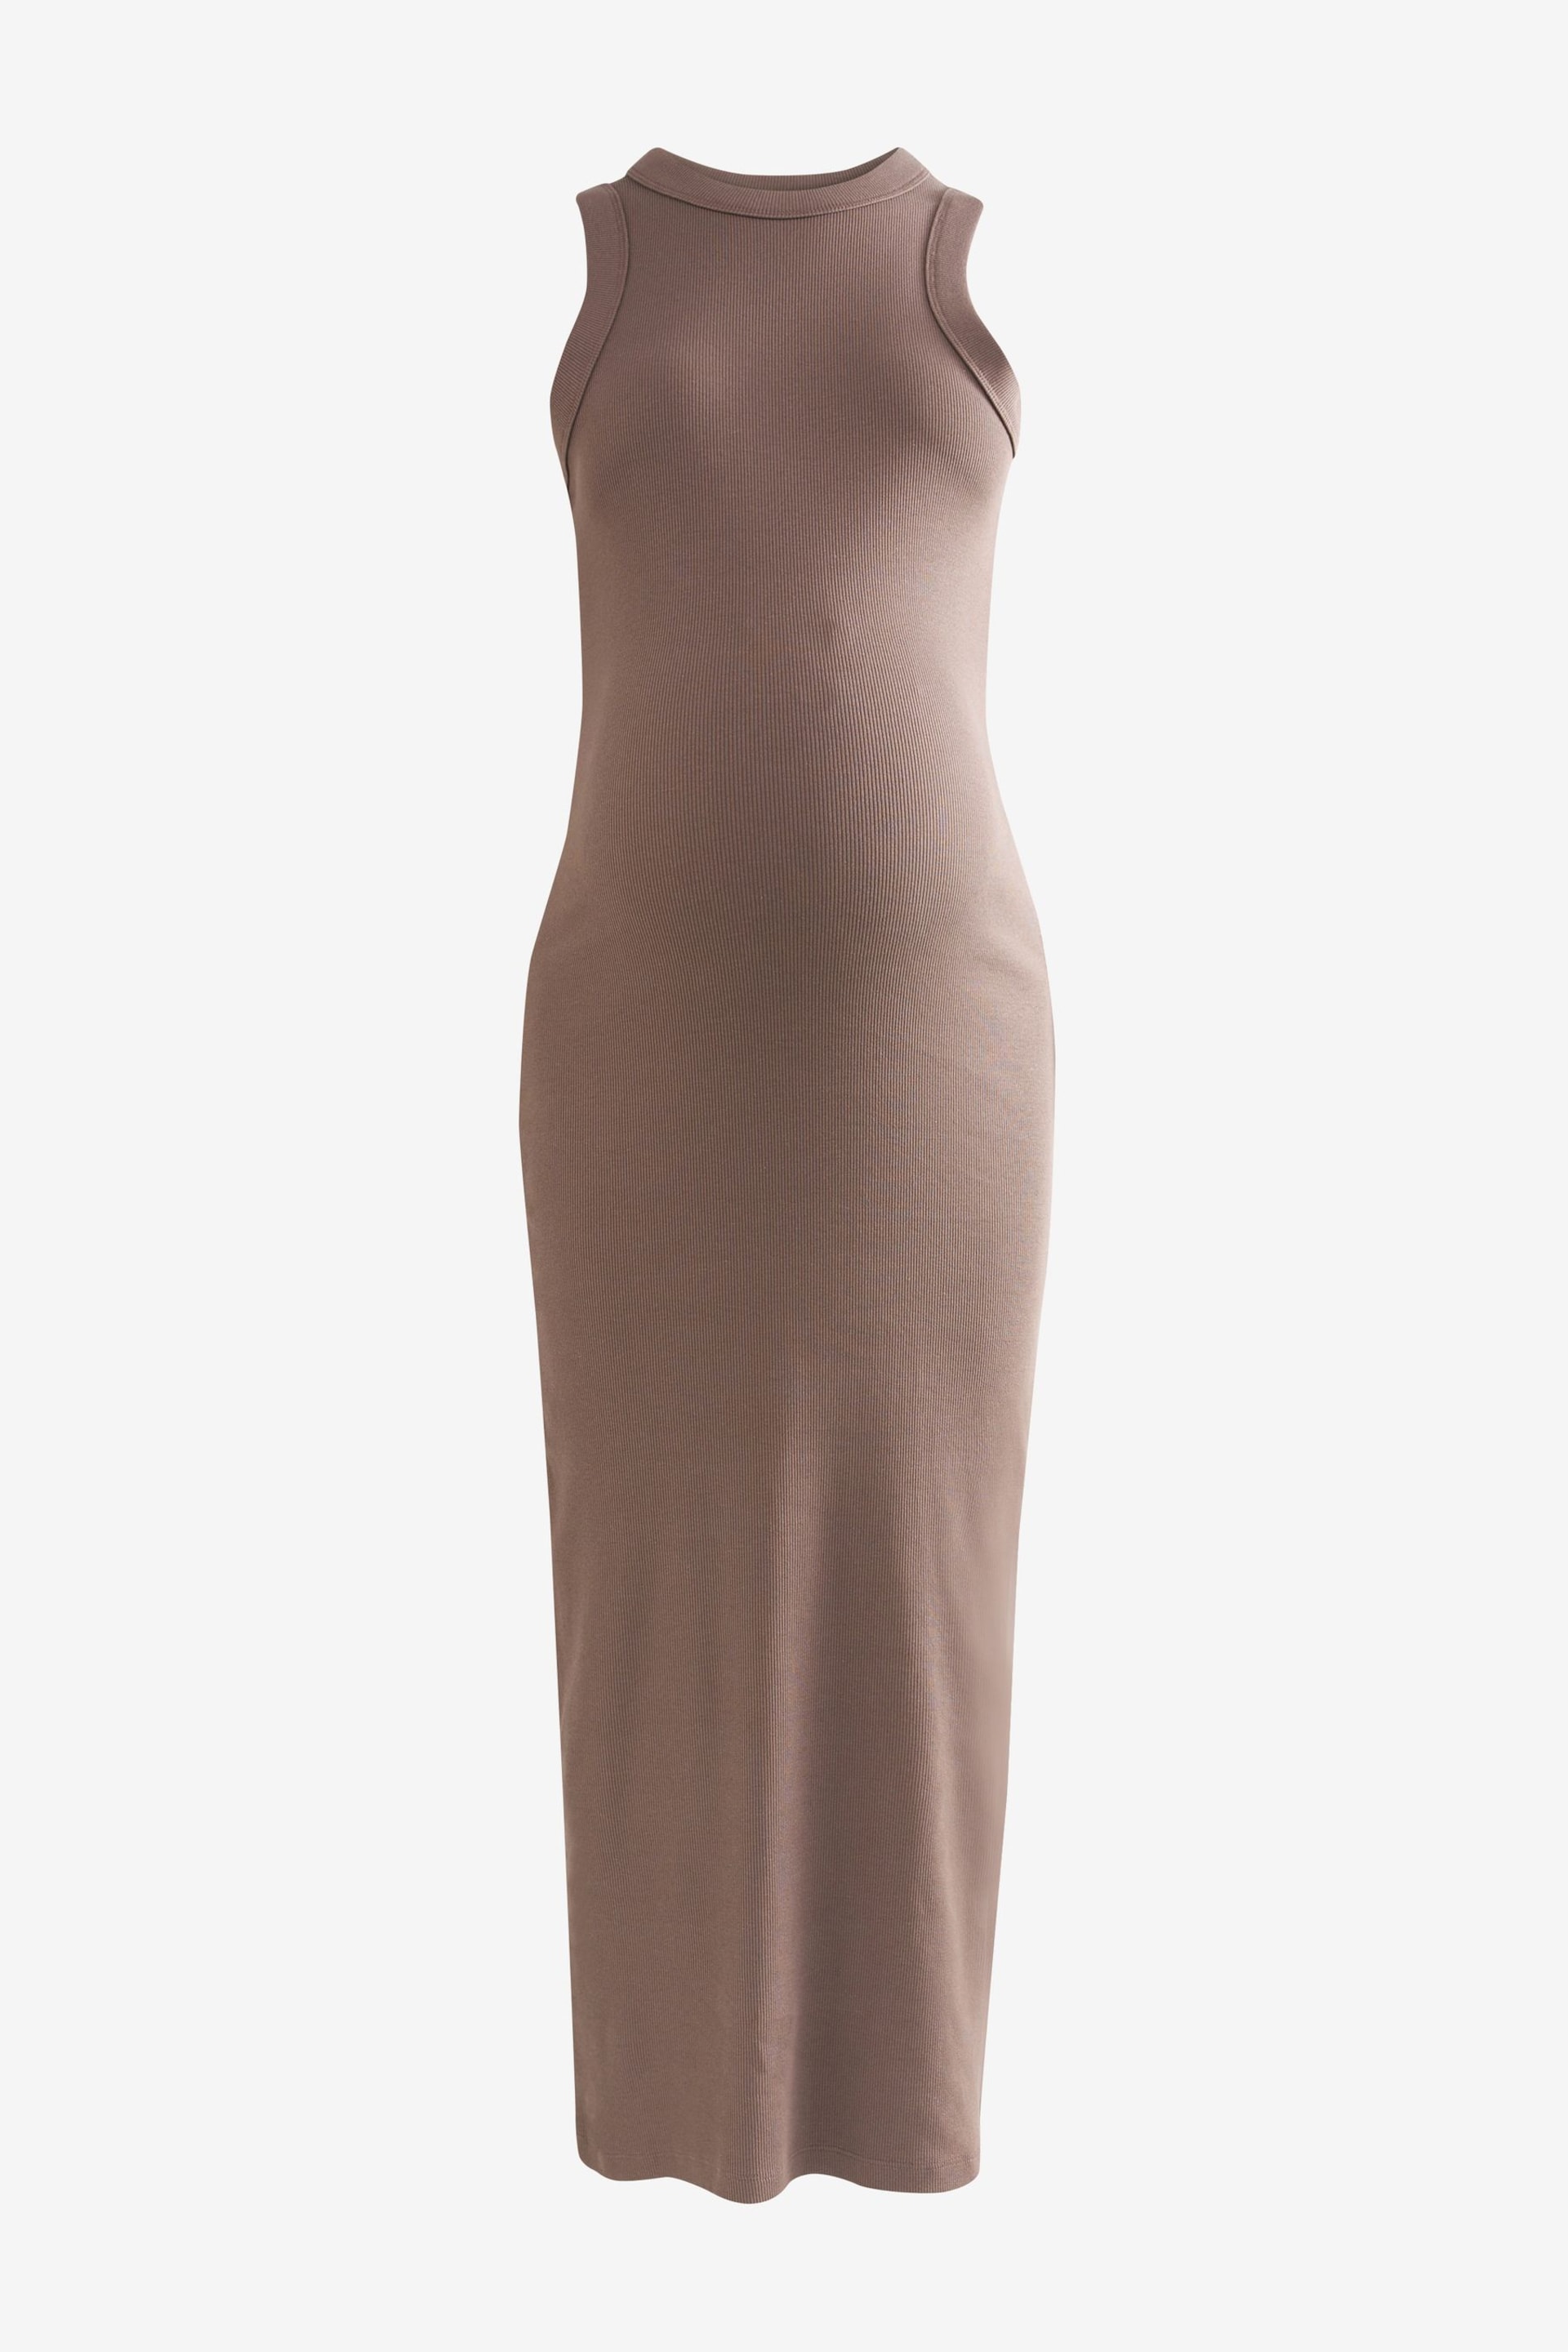 Mole Brown Maternity Ribbed Dress - Image 5 of 7